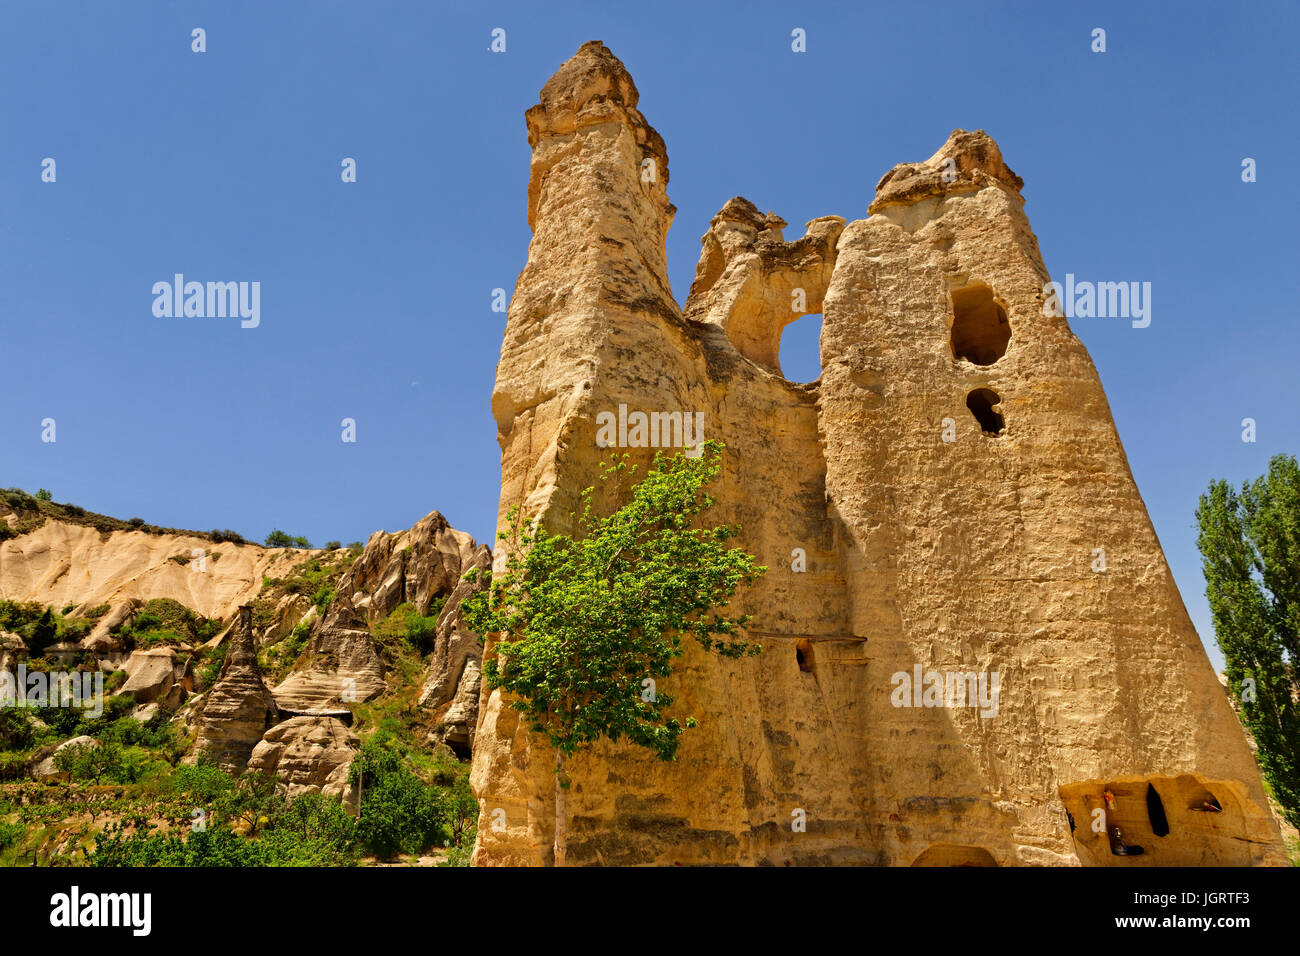 Cave dwellings and 'fairy chimneys' at Goreme National Park, Cappadocia, Turkey. Stock Photo